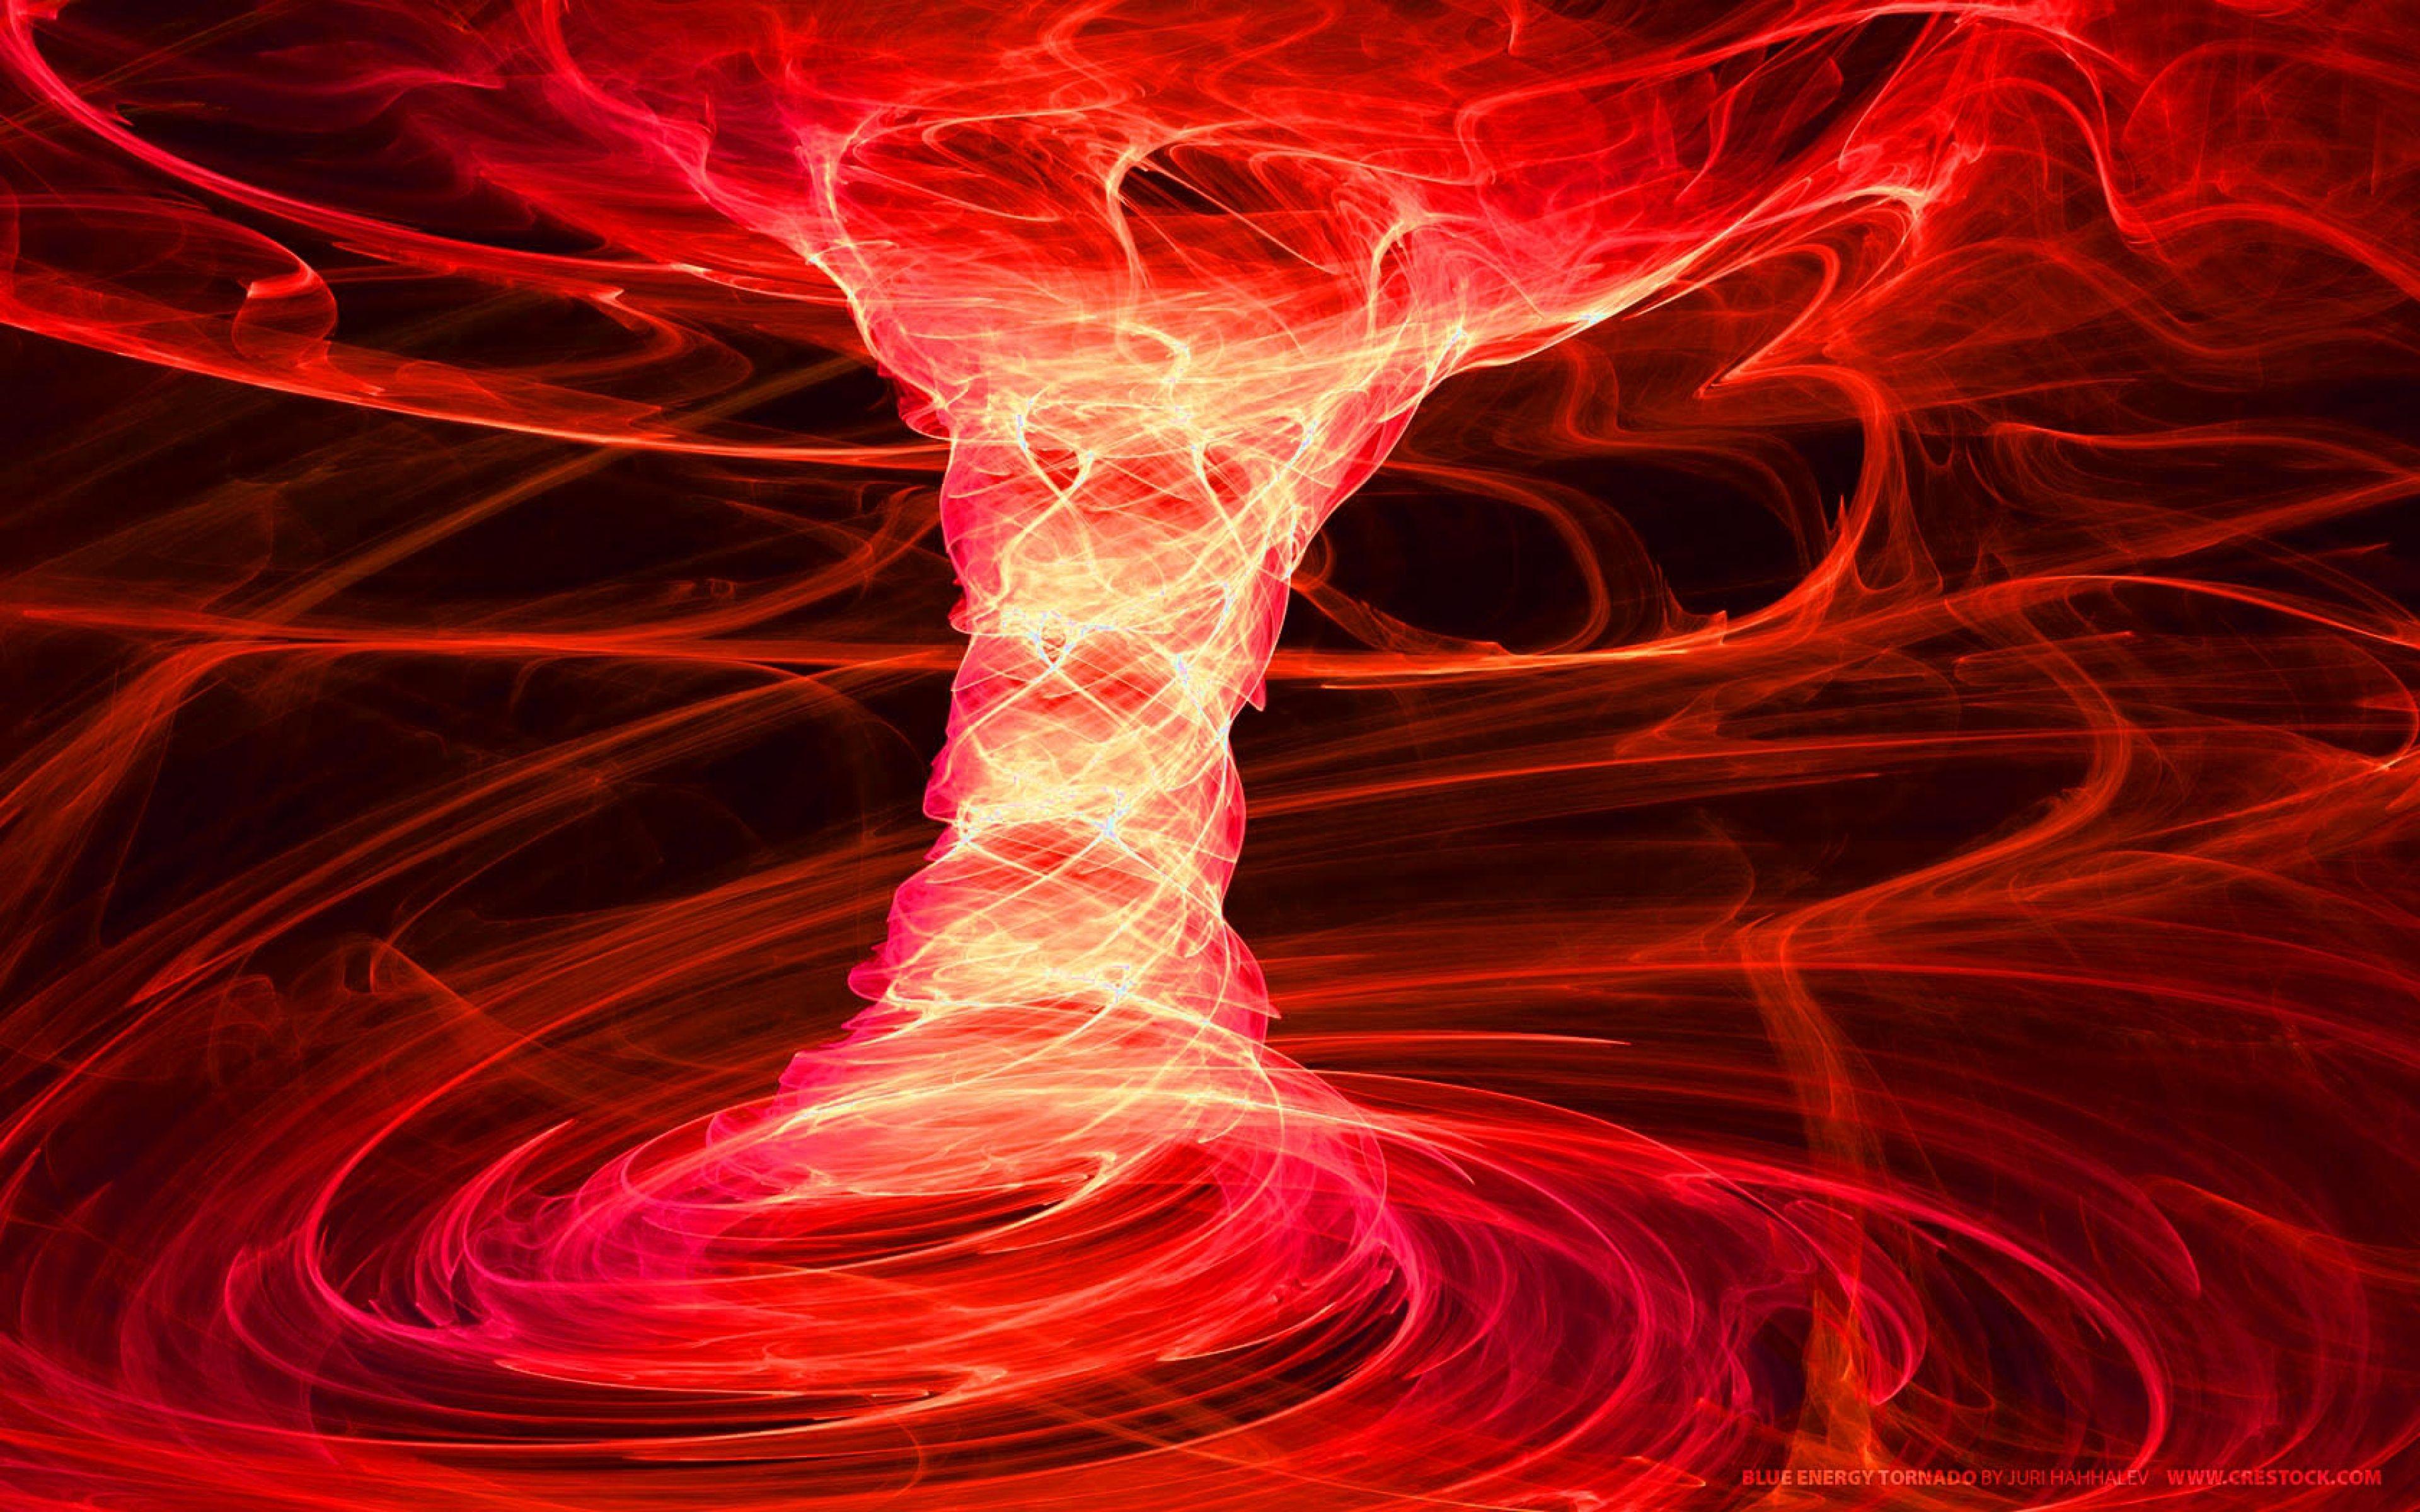 Download Red Fire Wallpaper High Definition #y4t 3840x2400 px 2.60